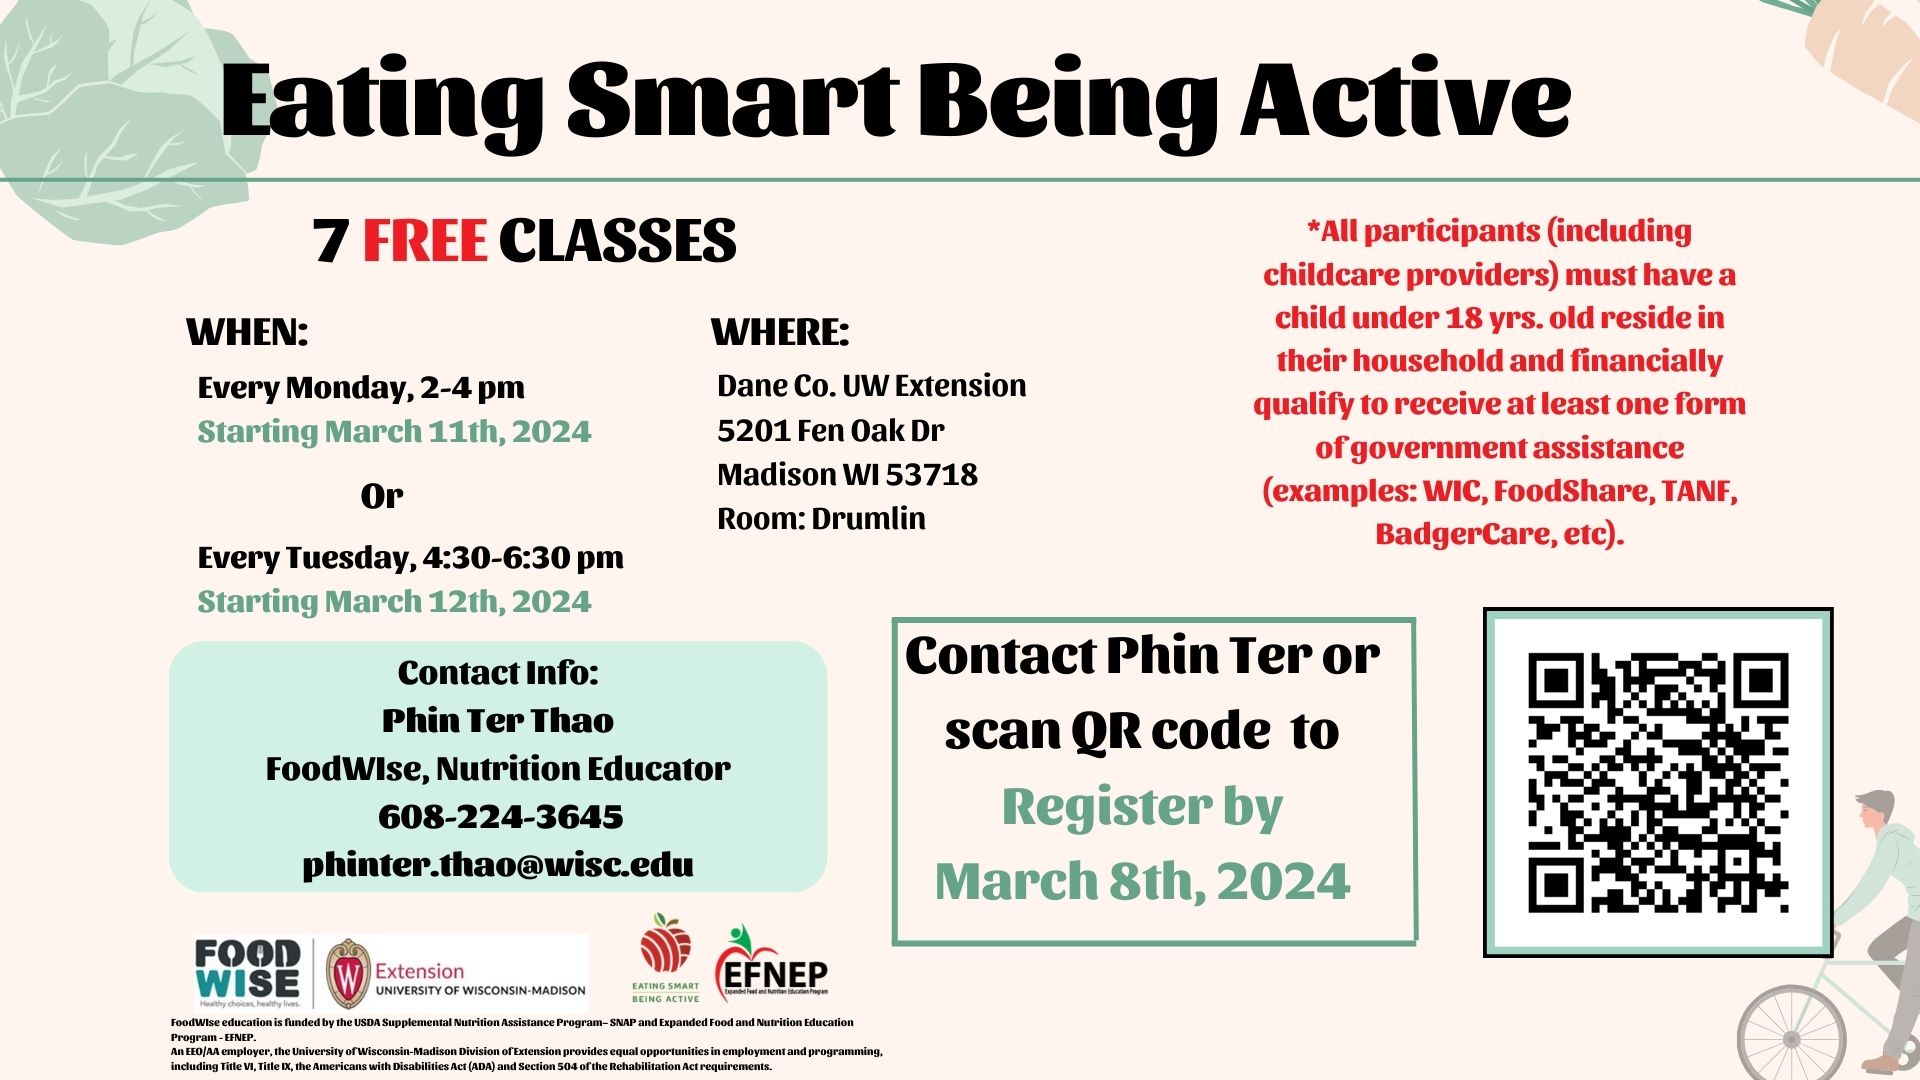 Flyer for FoodWIse classes on eating smart and being active